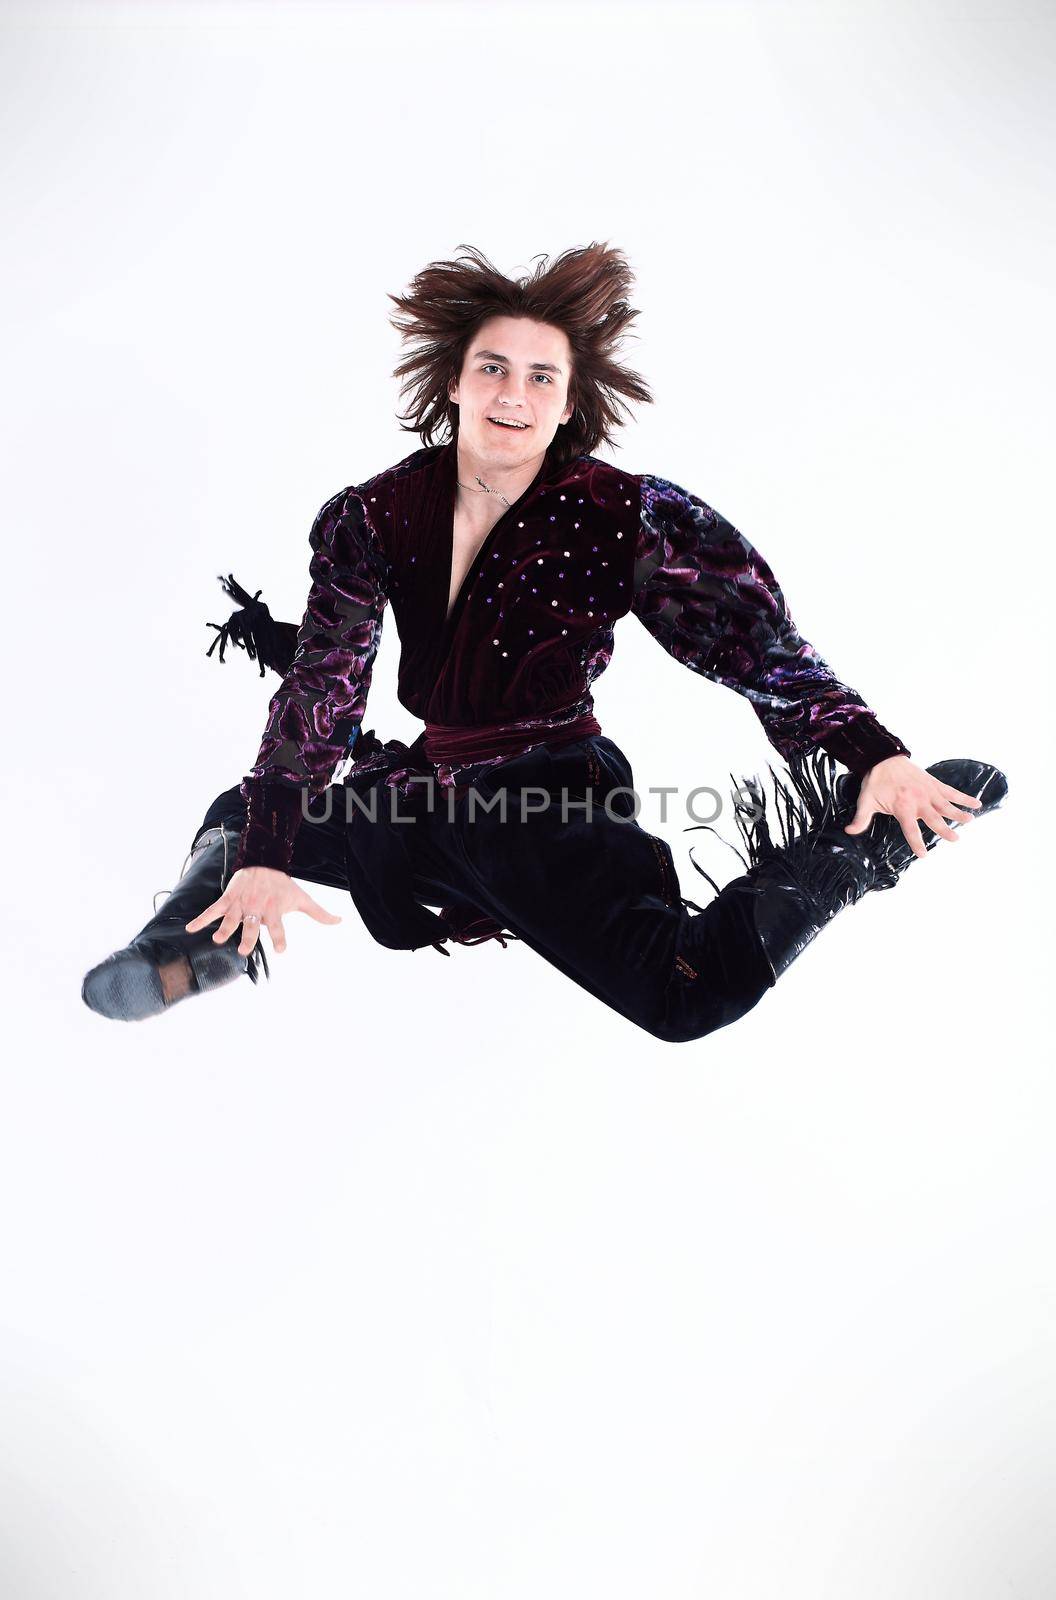 male dancer.Gypsy dance.jumping photo.a dance show.the national costume.ethnic culture.the photo with blank space for text